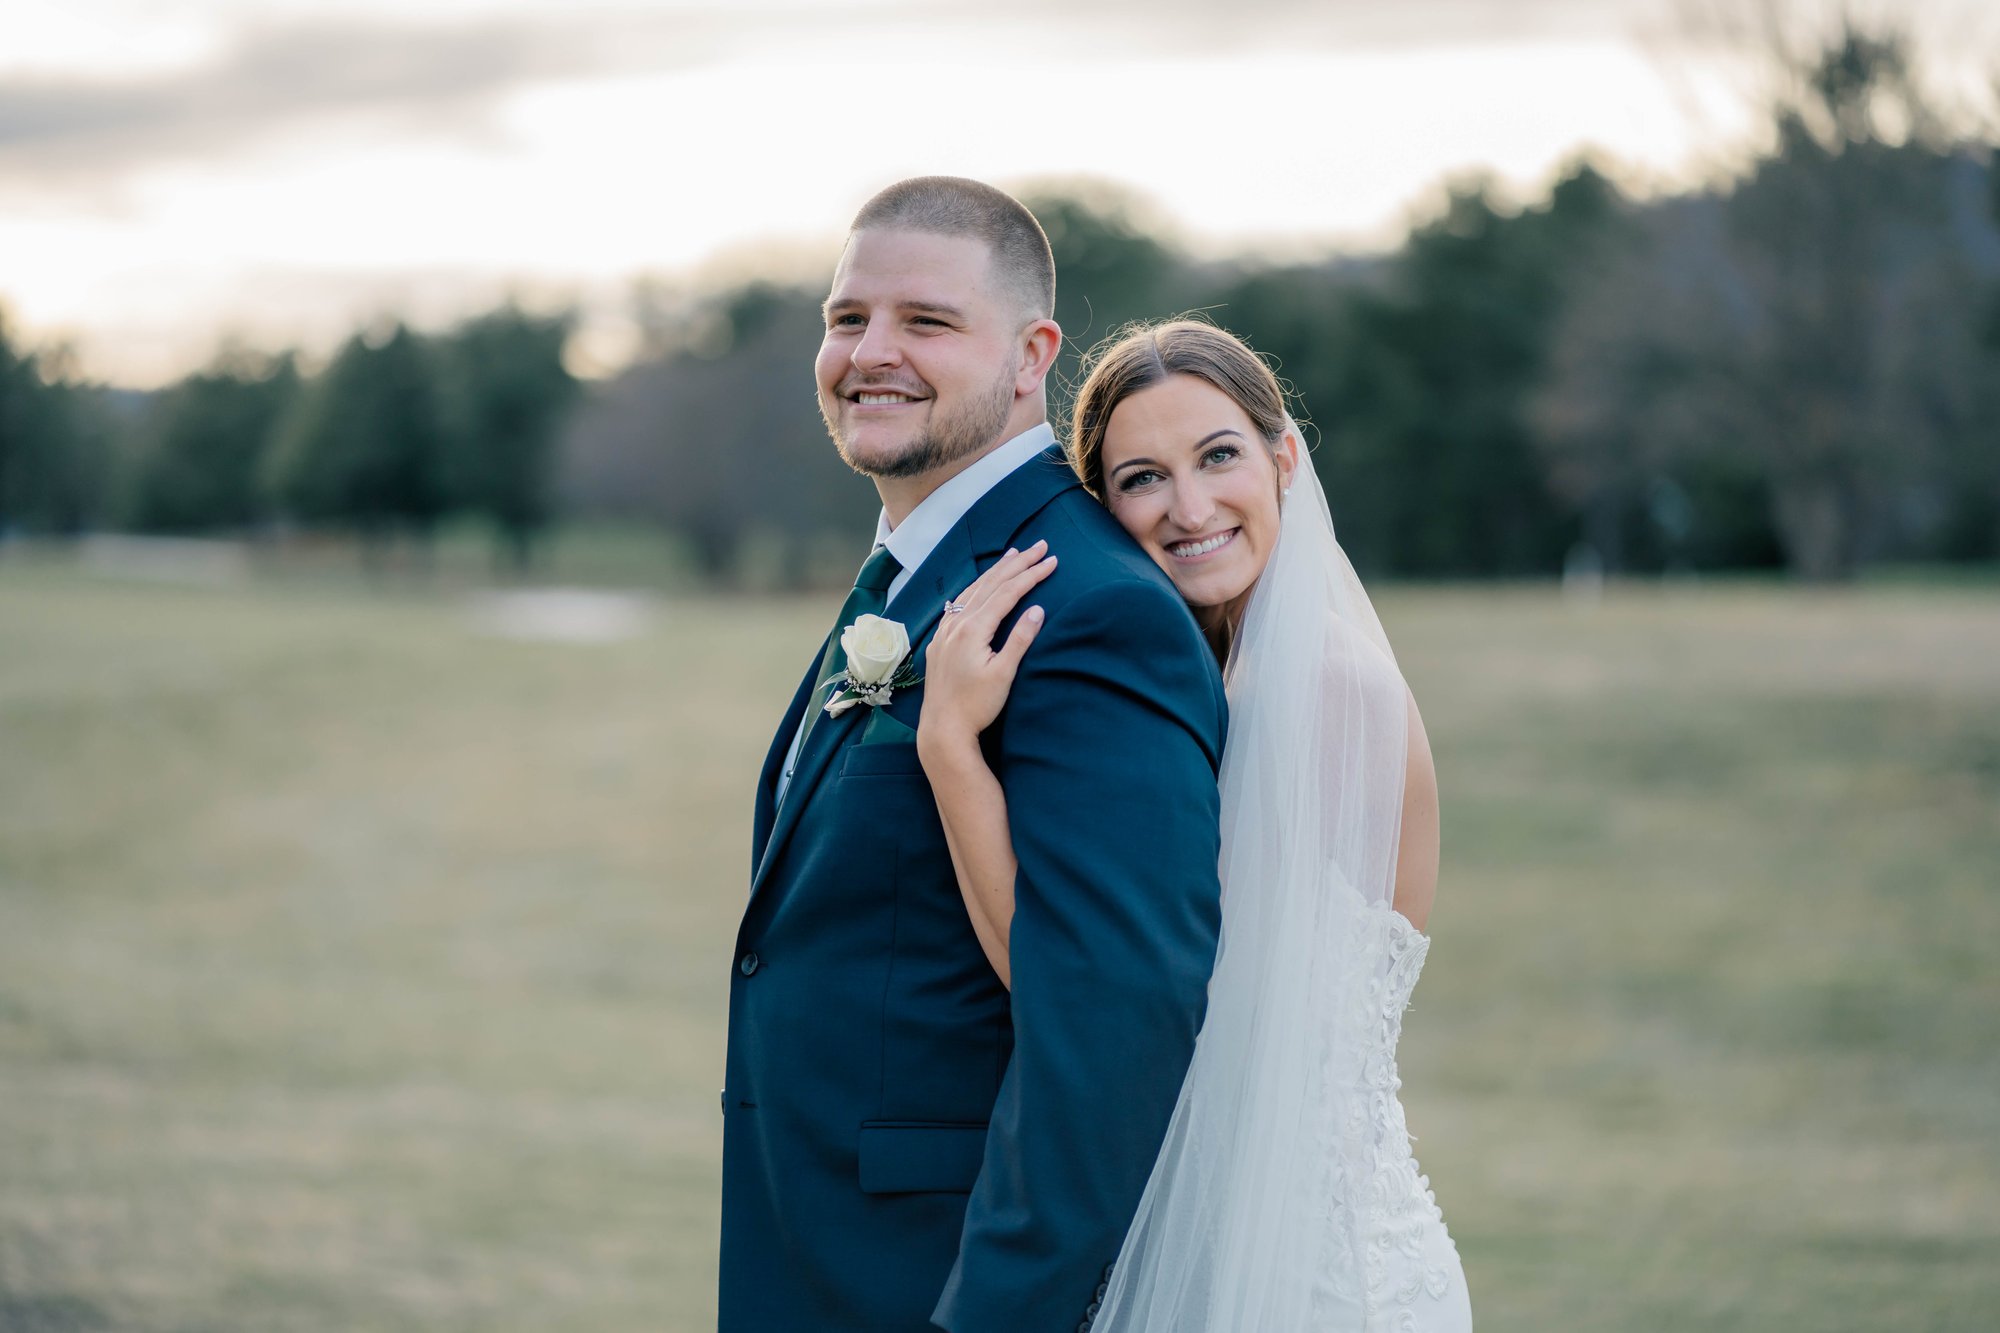 Wedding photography of a couple in Virginia captured by Virginia wedding photographer Stephanie Grooms Artistry.